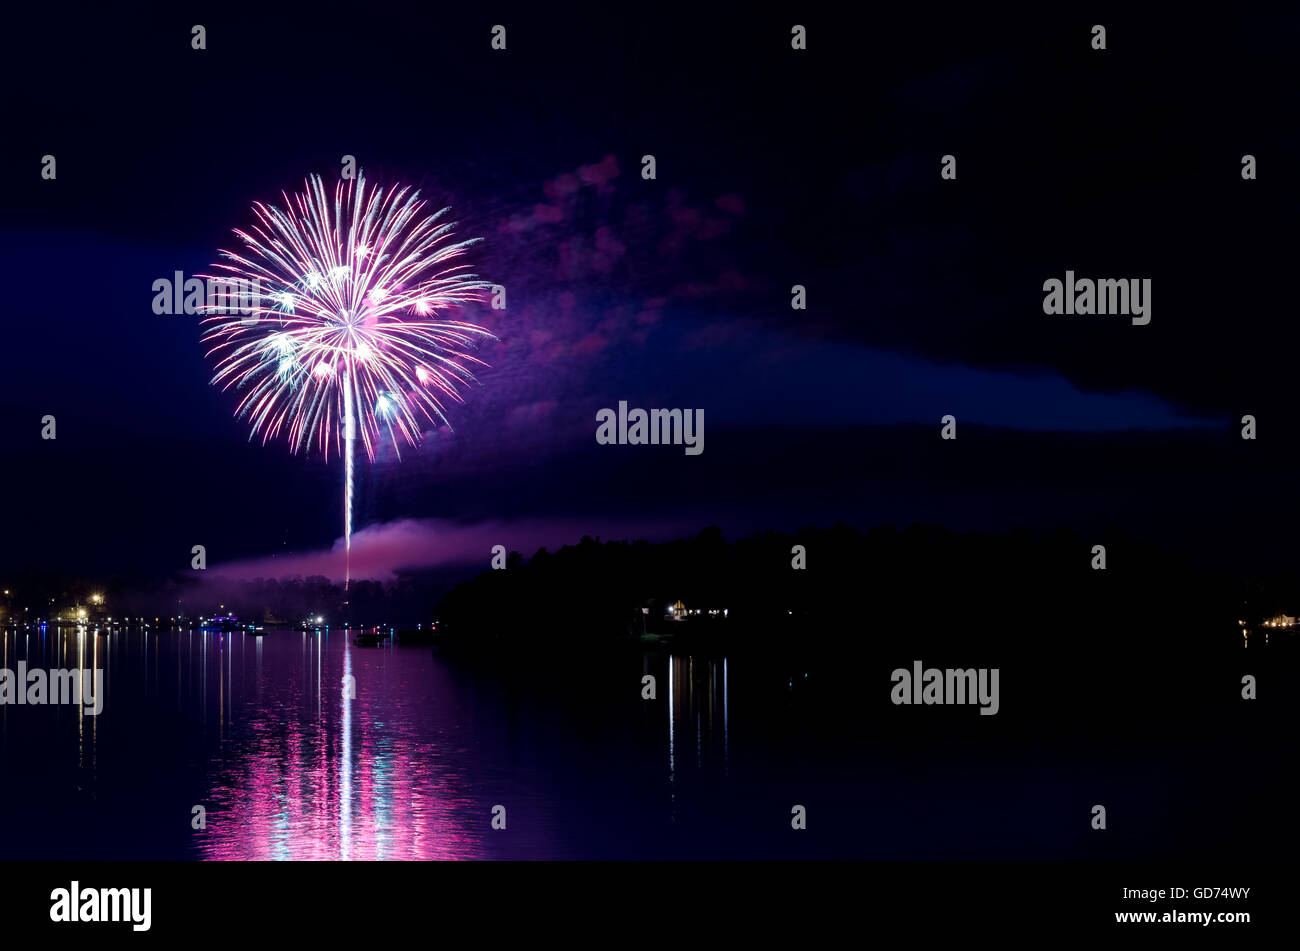 steamboat bay in east gull lake during fourth of july fireworks